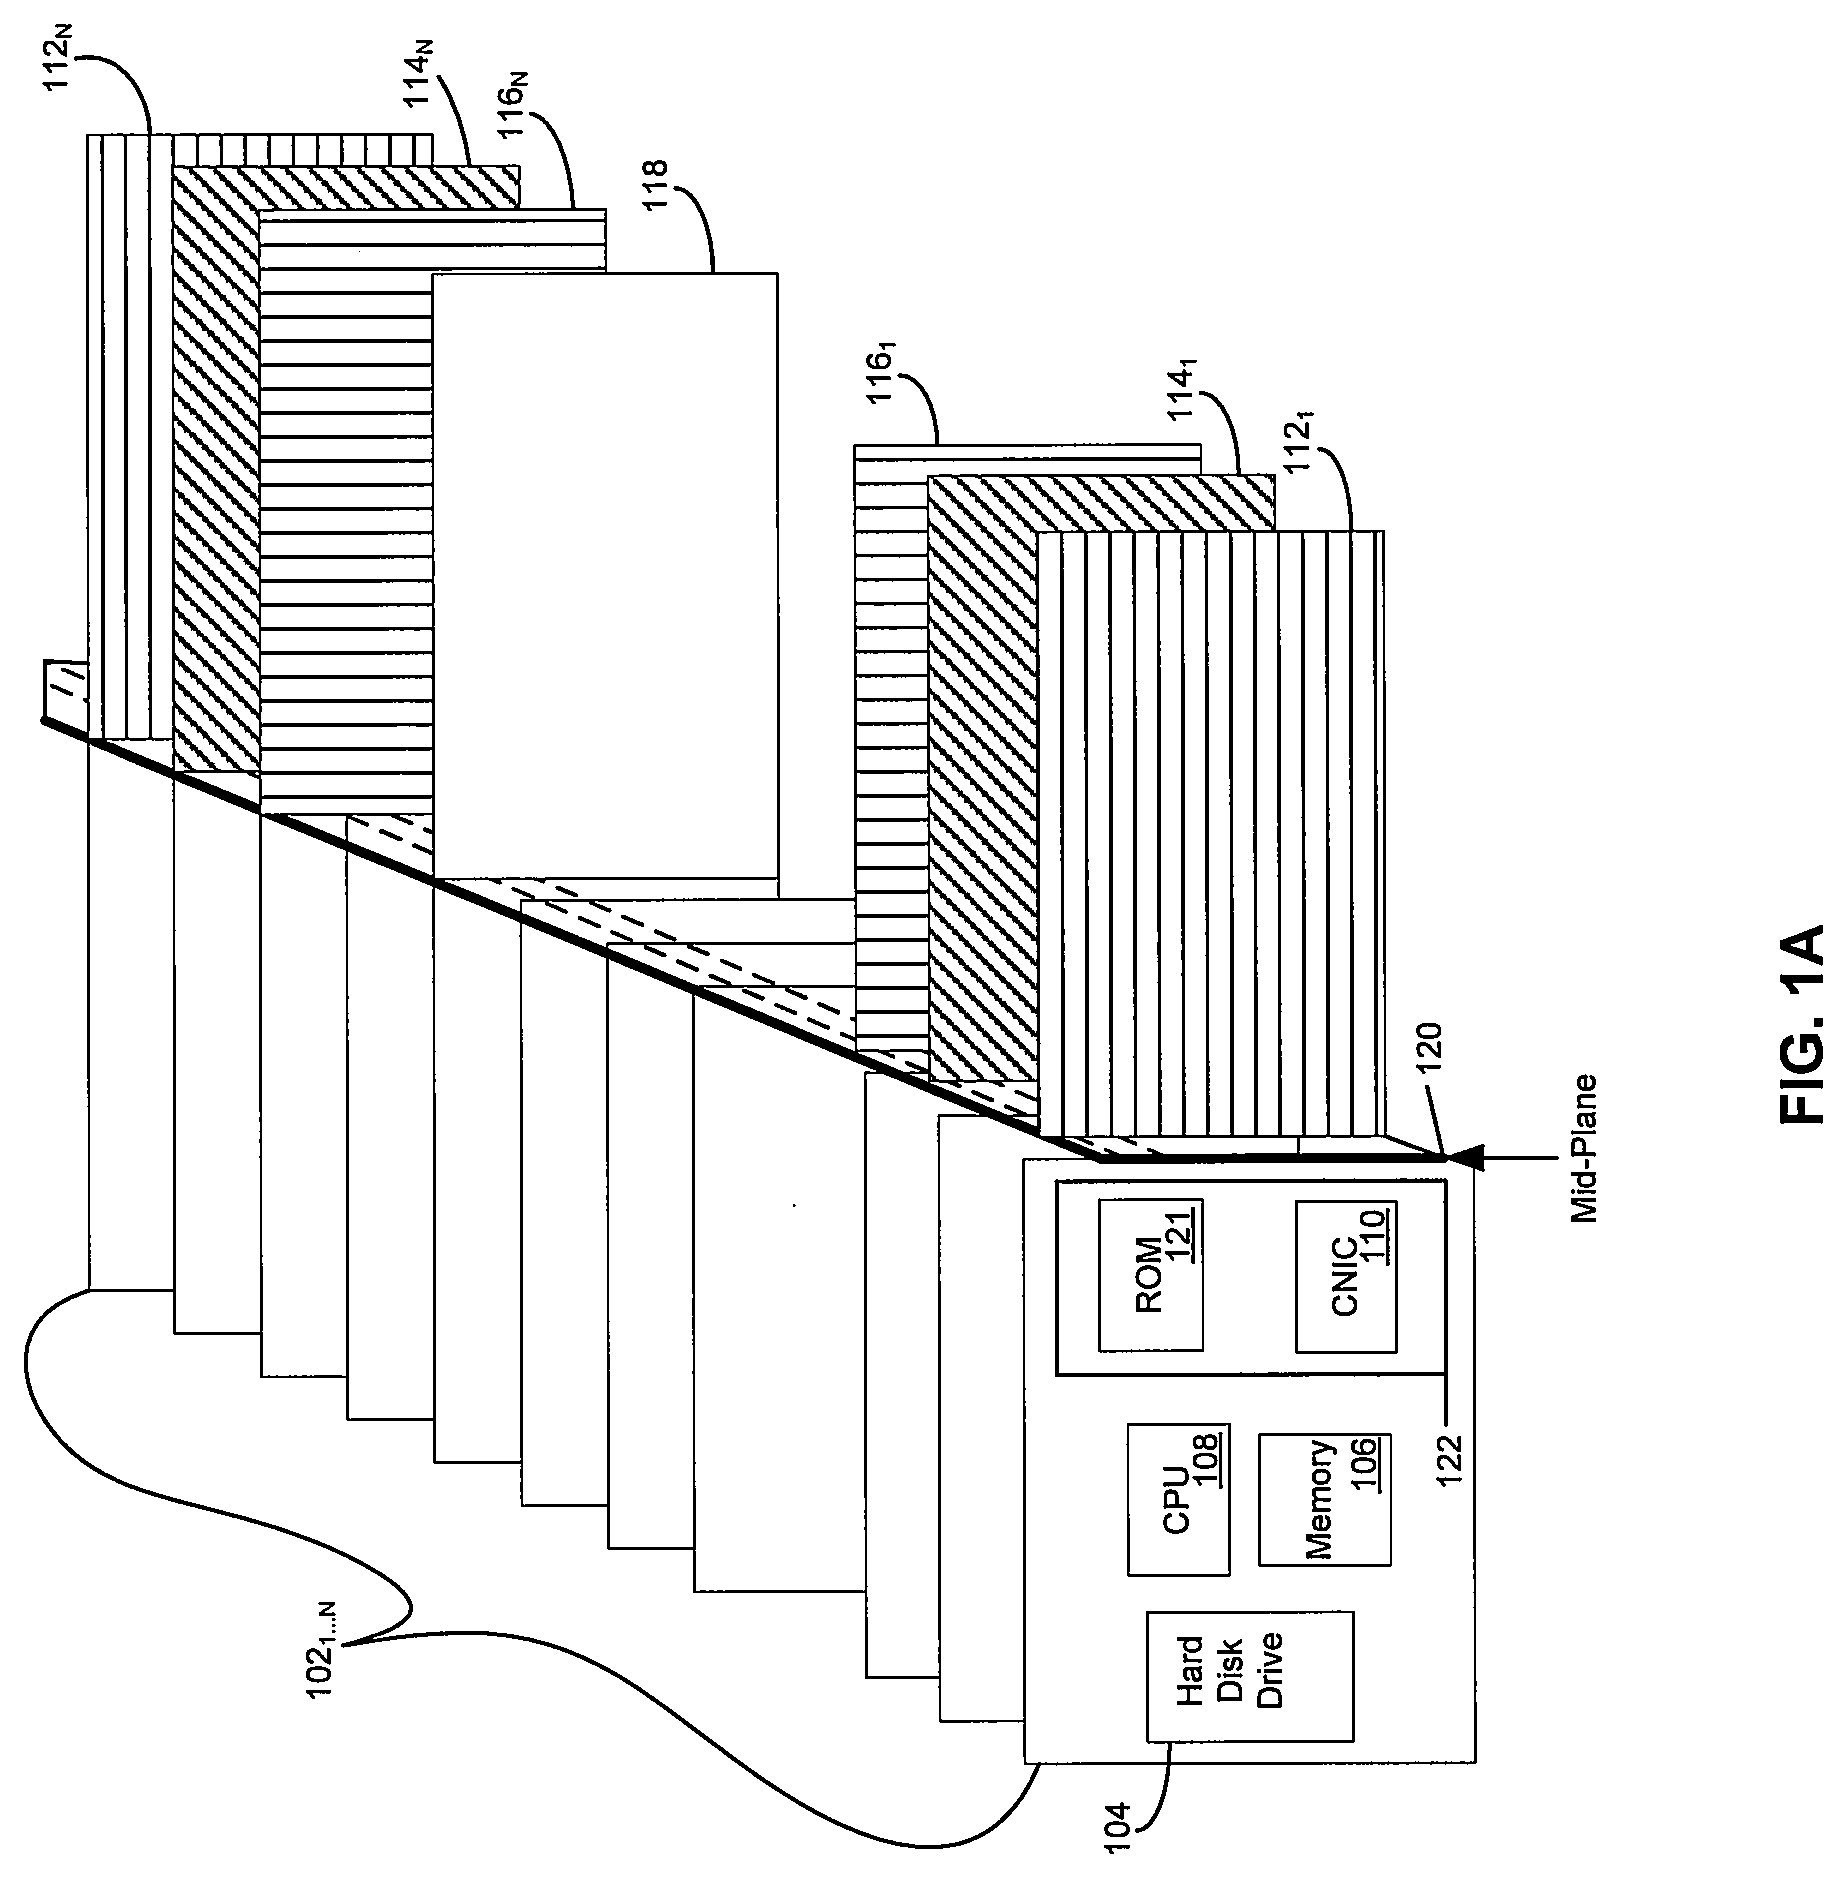 Method and System for HBA Assisted Storage Virtualization